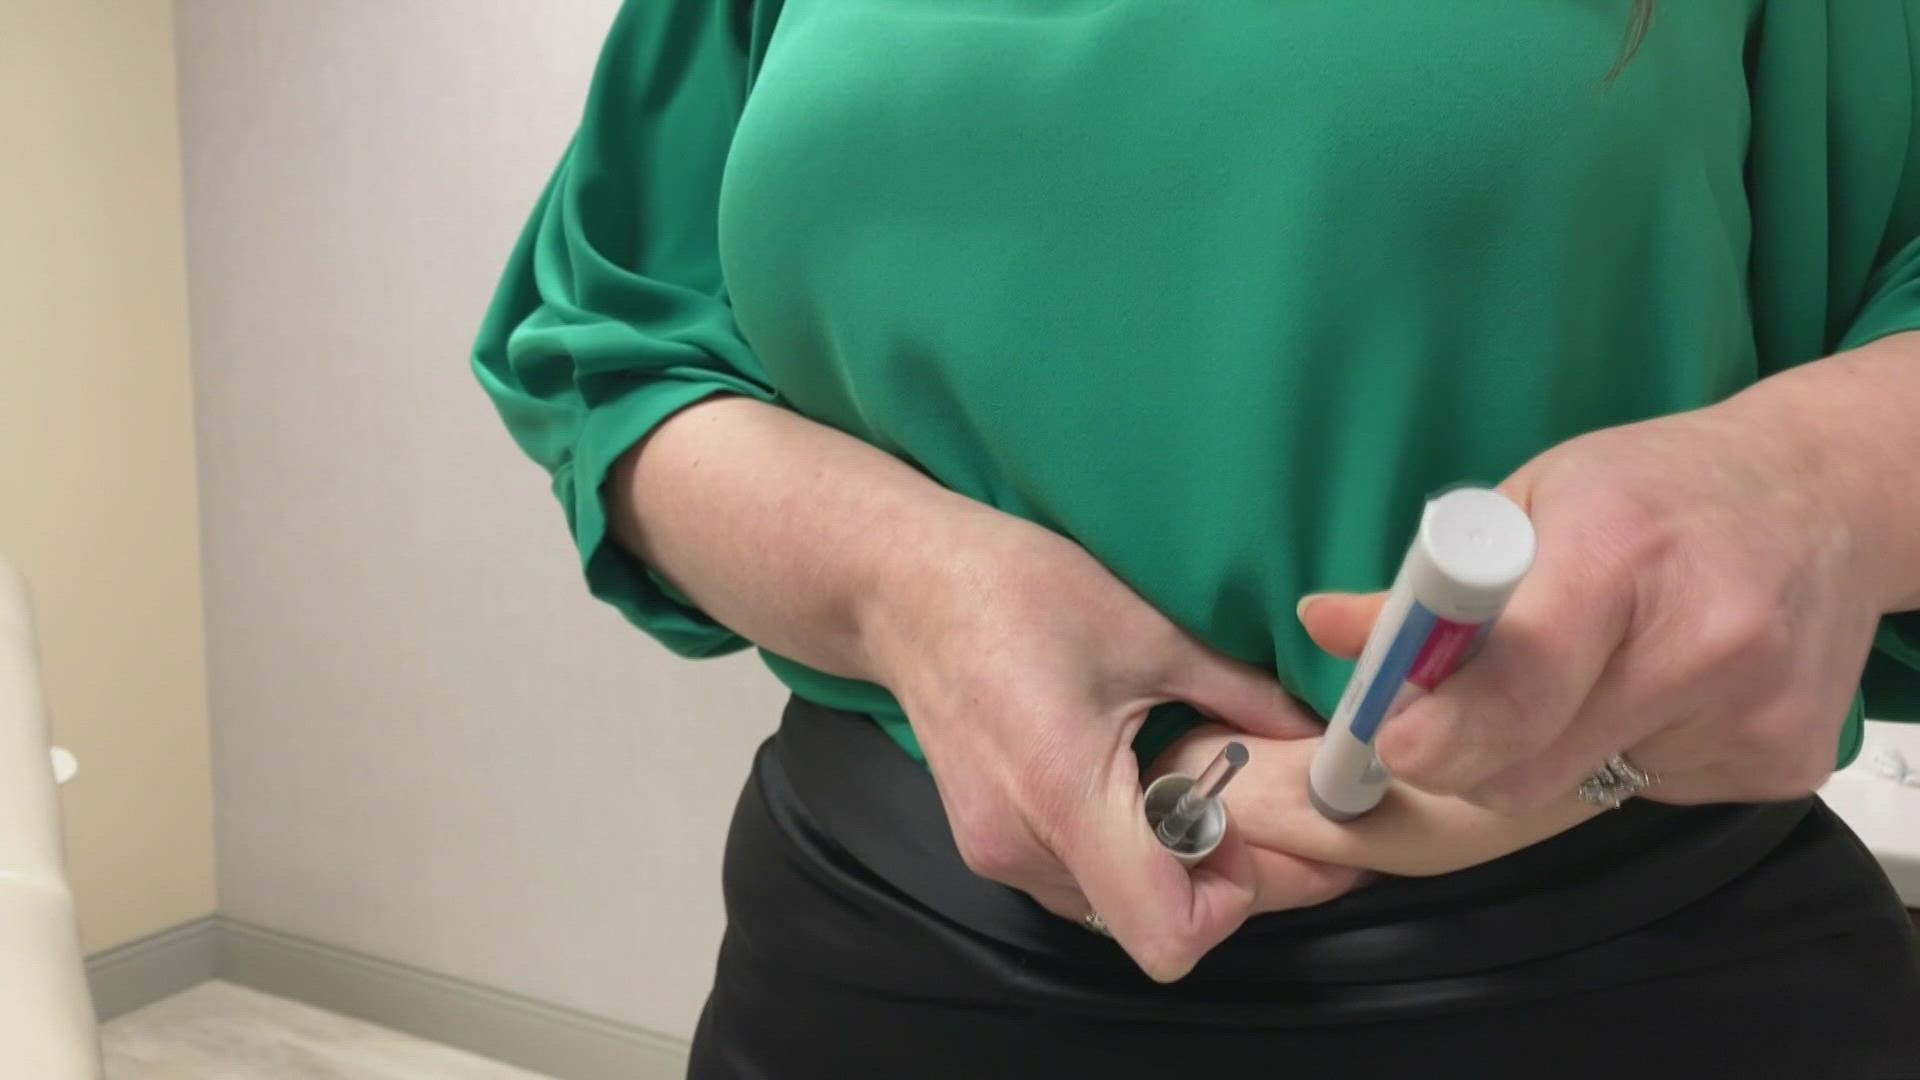 Health officials have developed an injection that when used, once a week, helps a person lose weight without diet and exercise.